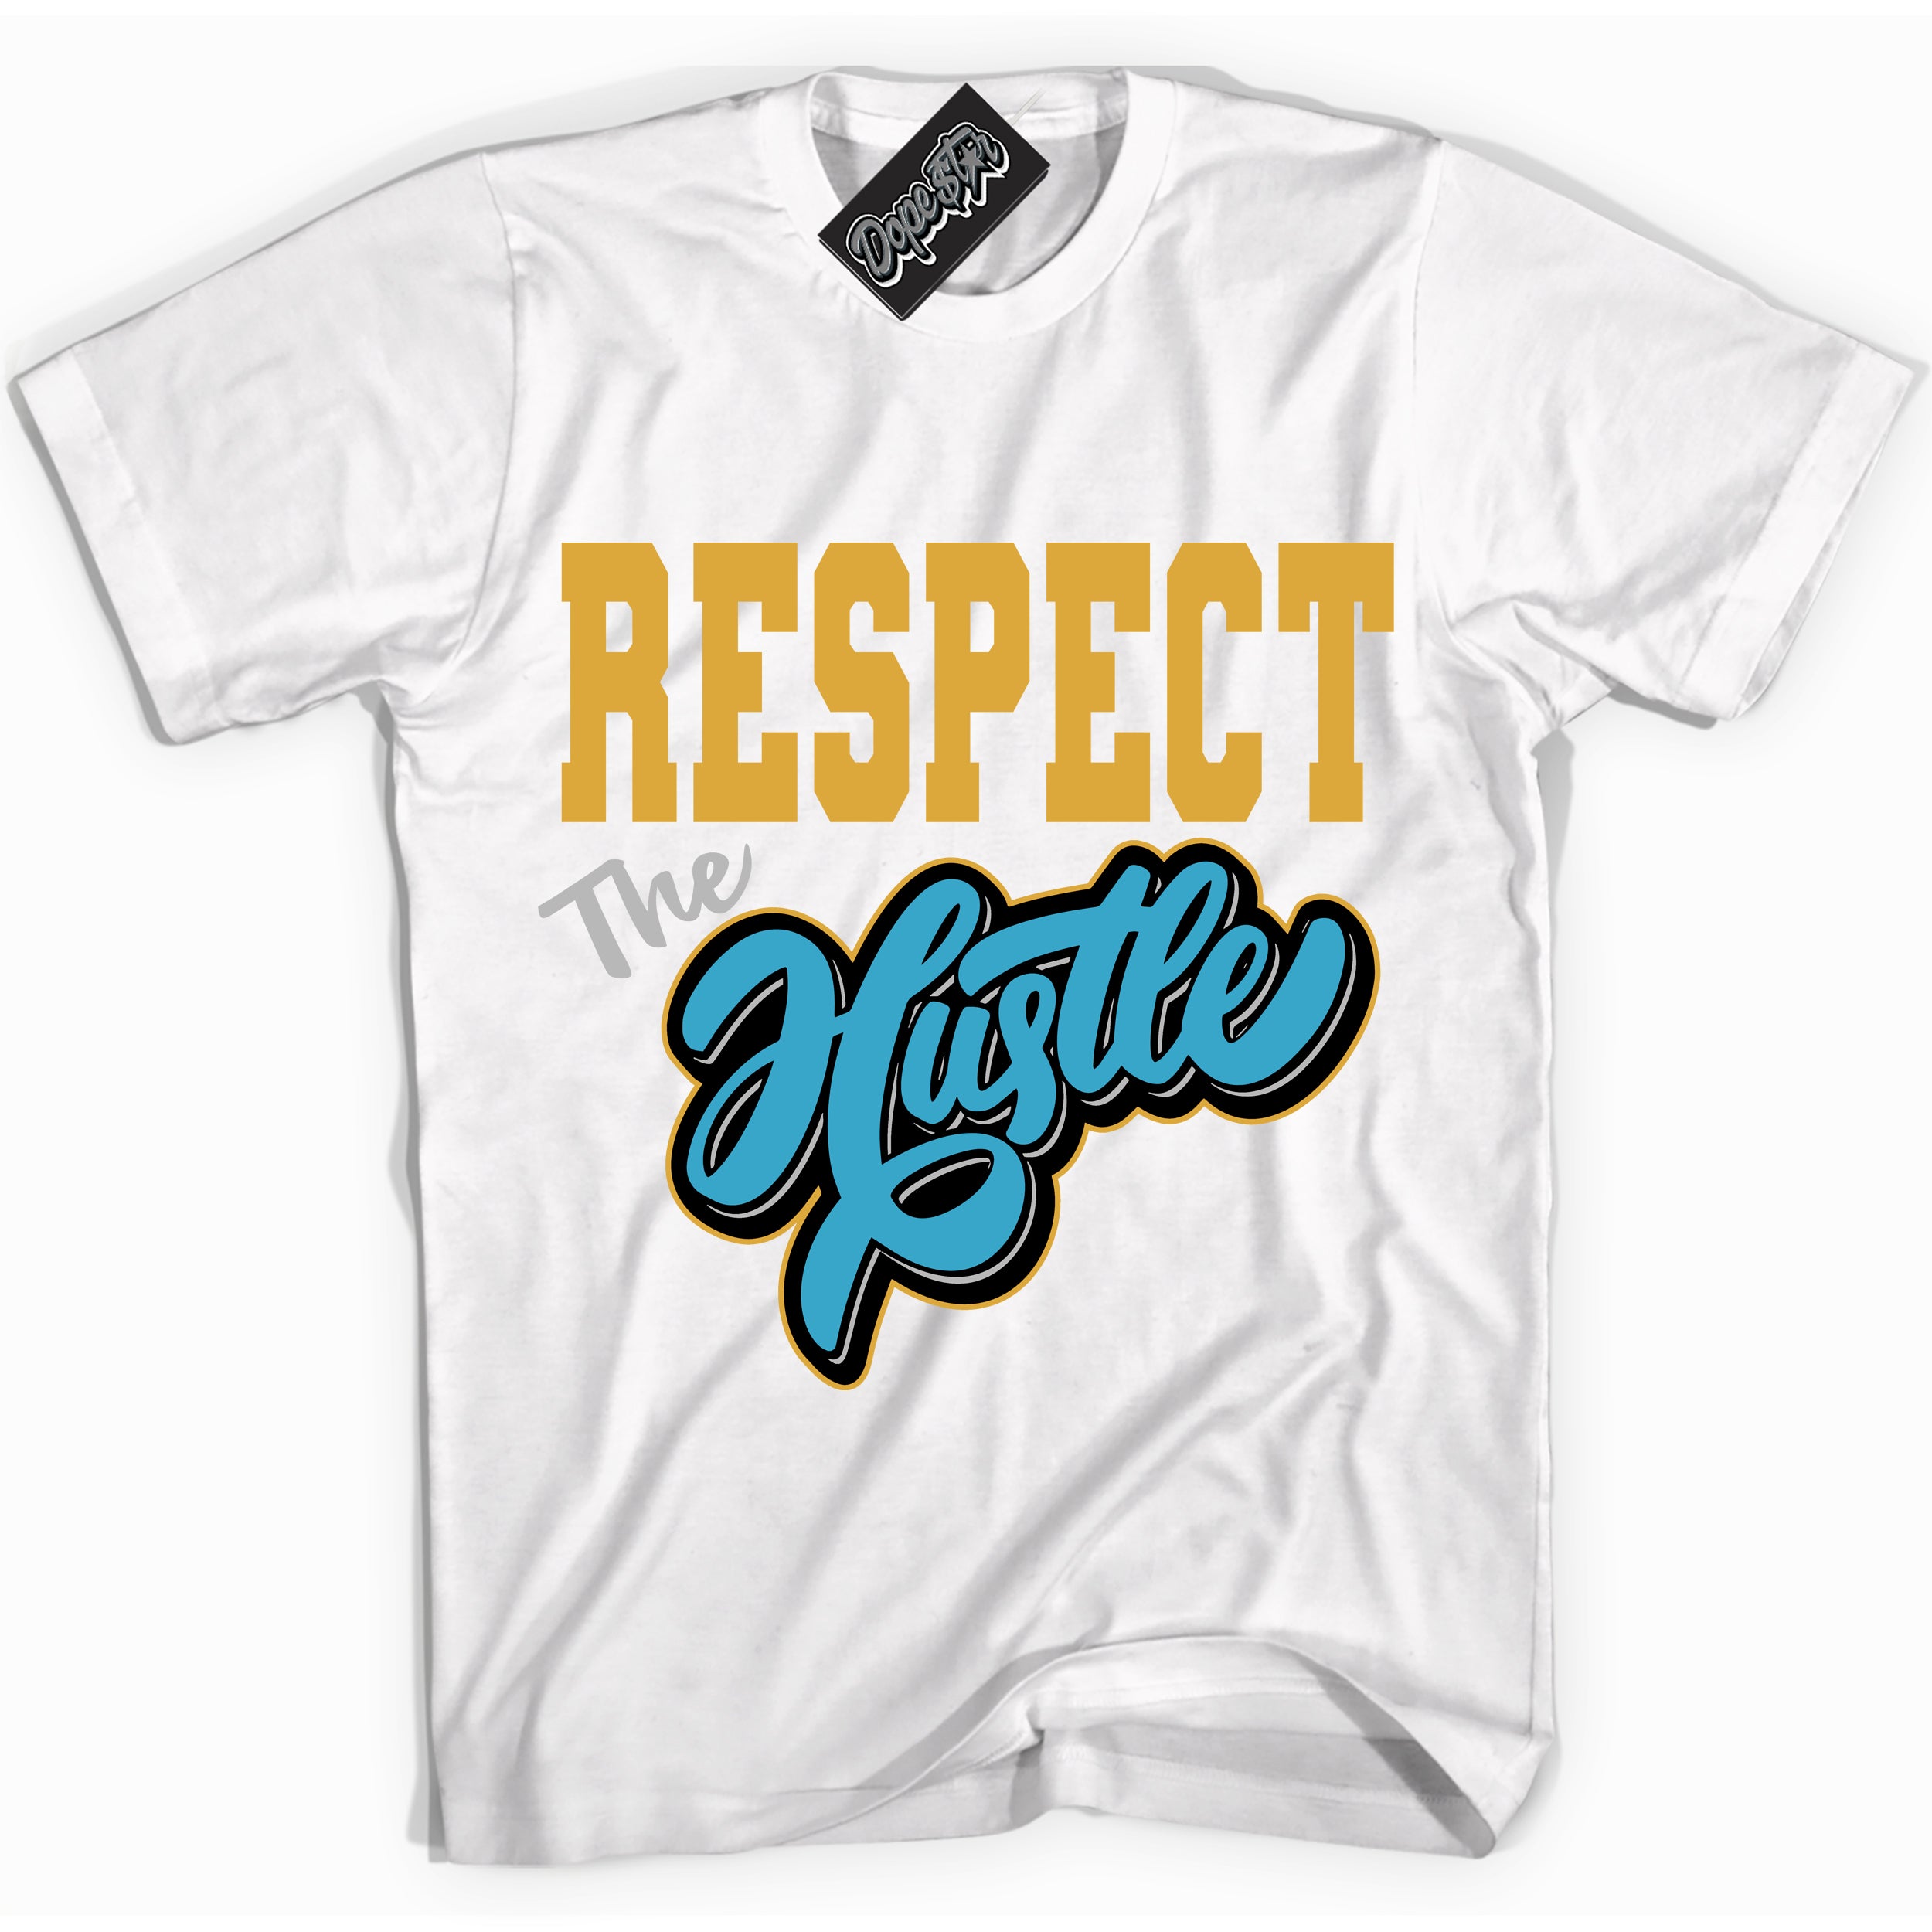 Cool White Shirt with “ Respect The Hustle” design that perfectly matches Aqua 5s Sneakers.